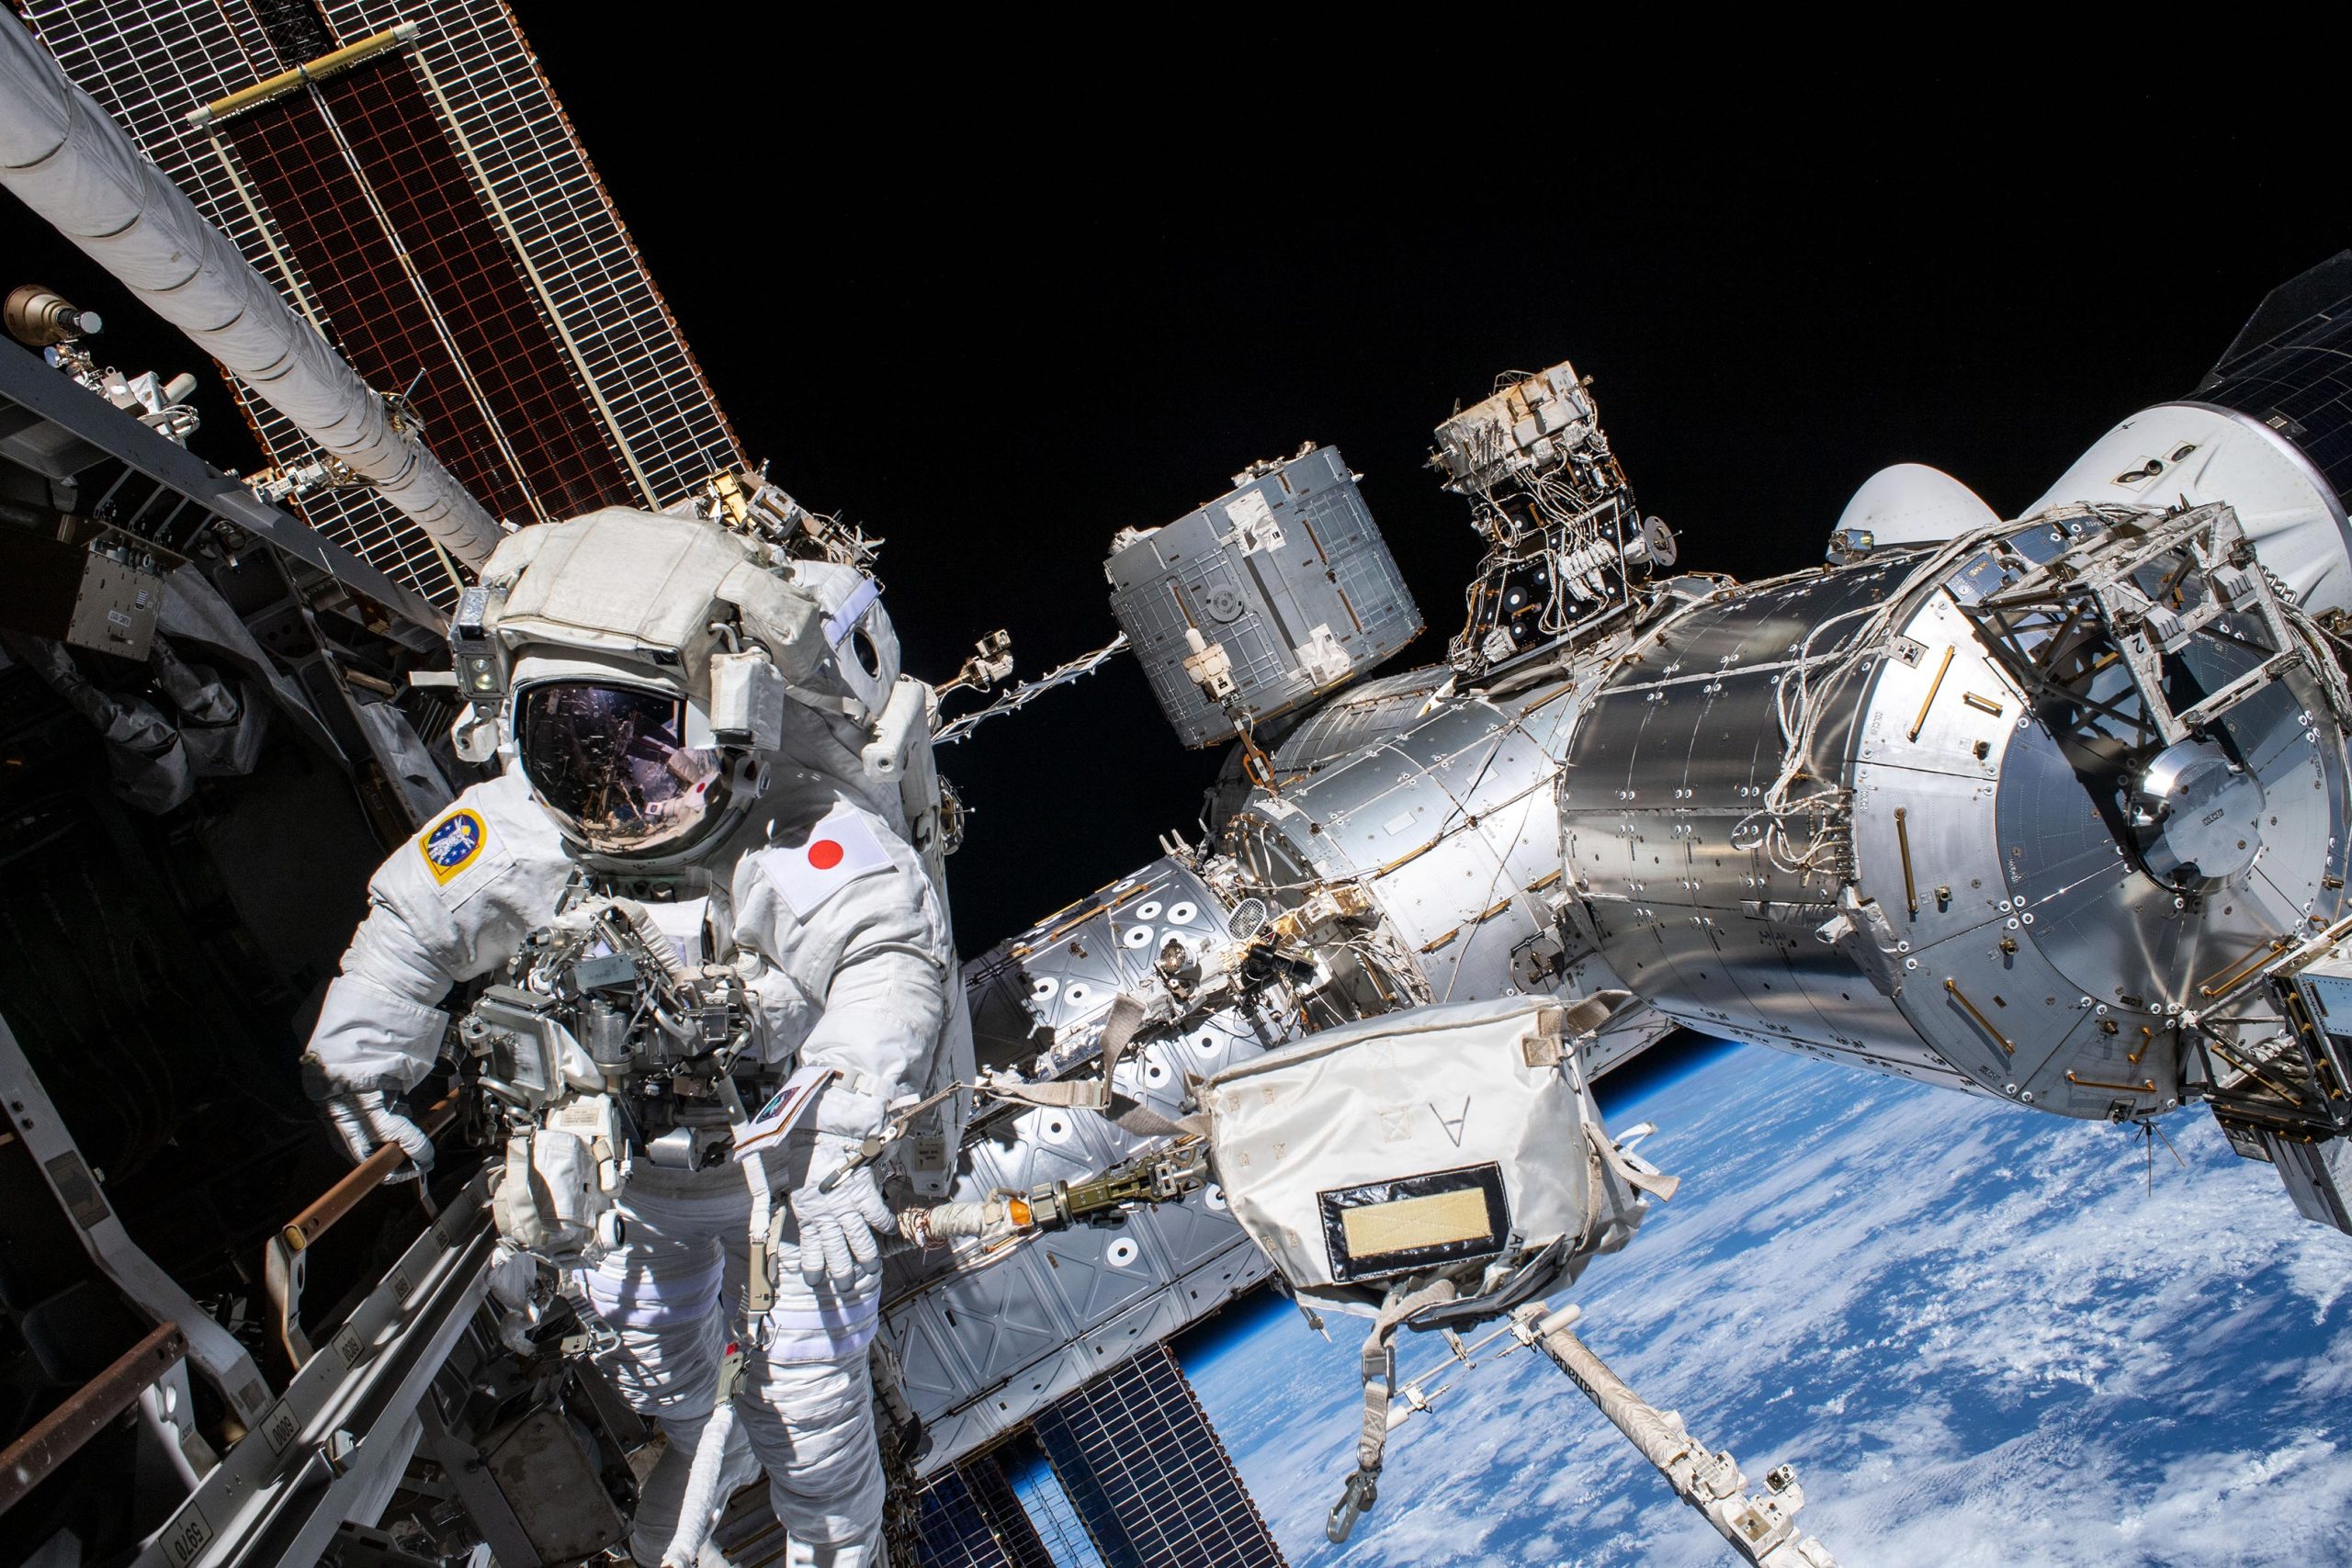 Astronauts Gearing Up for Today’s Spacewalk To Upgrade ISS Power System